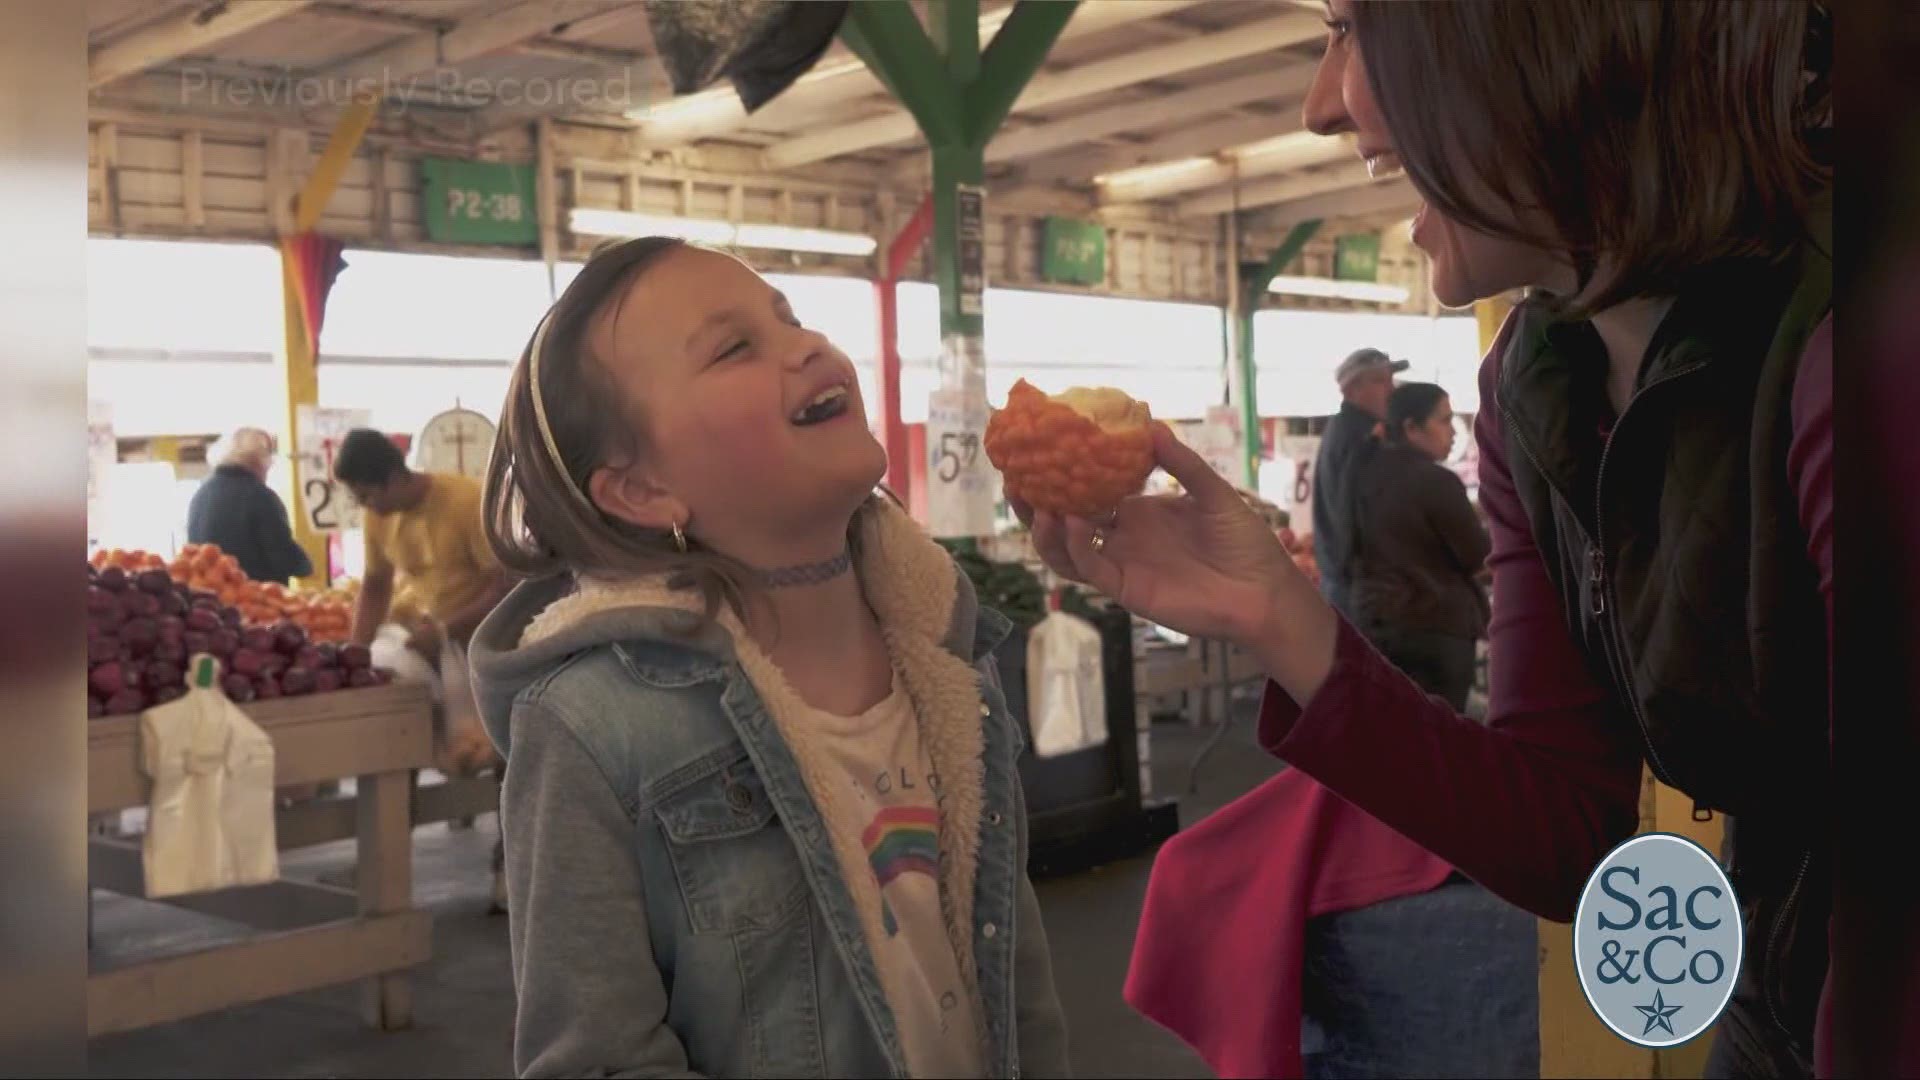 Check out all the fun at the Denio’s farmers market! From vendors to live entertainment Denio’s is a great weekend spot for the whole family! The following is a paid segment sponsored by Denio’s.